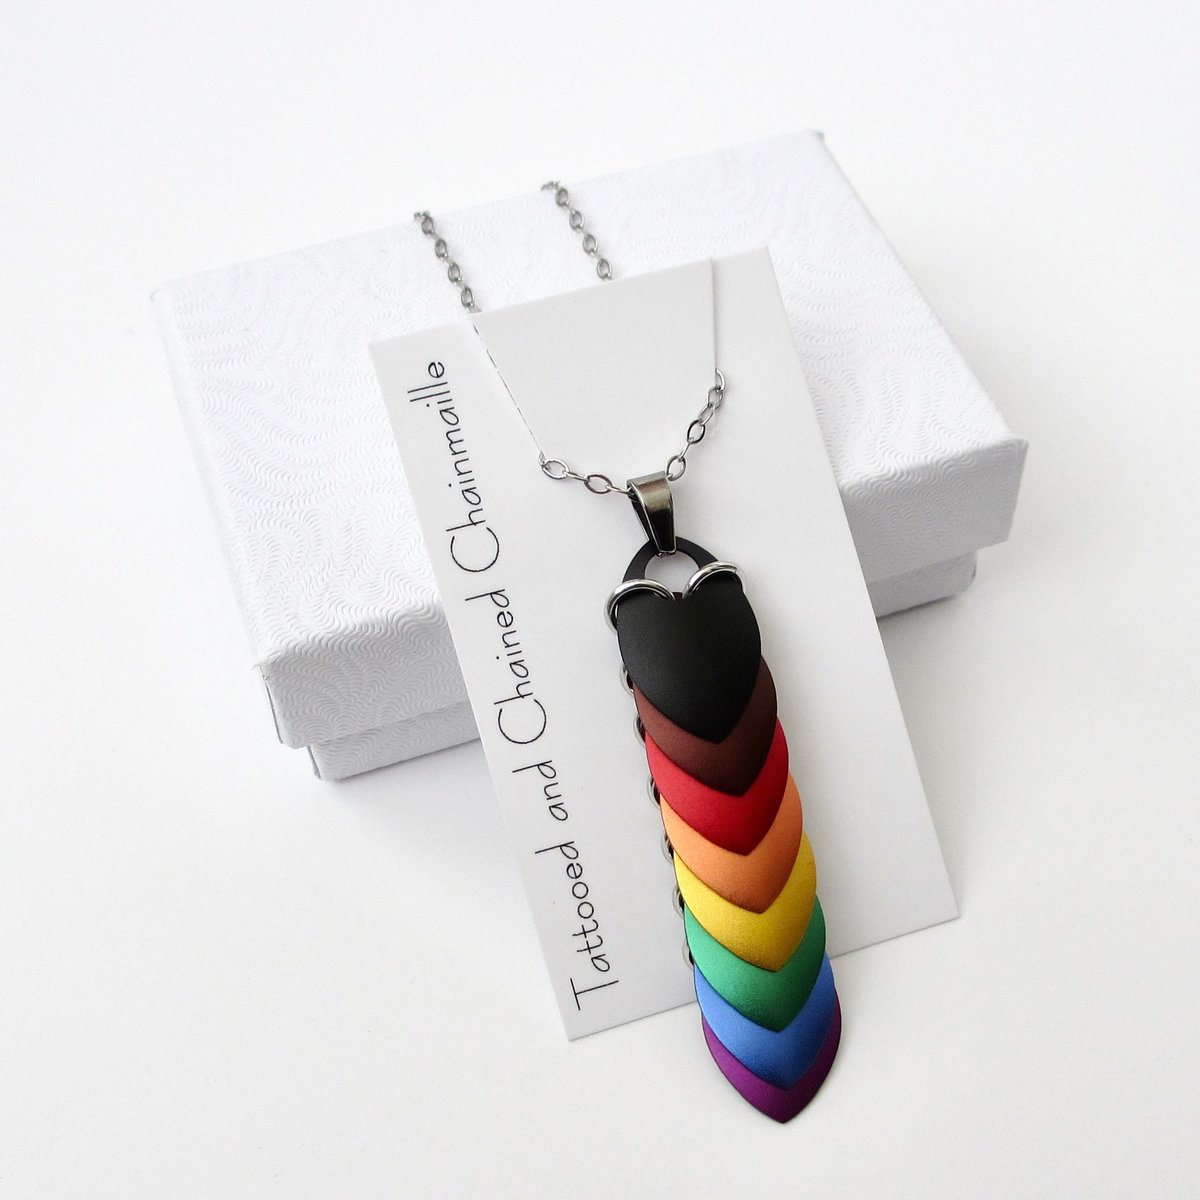 Philadelphia pride flag pendant - black, brown and rainbow 8 color chainmail scale pendant, LGBTQ gay pride necklace